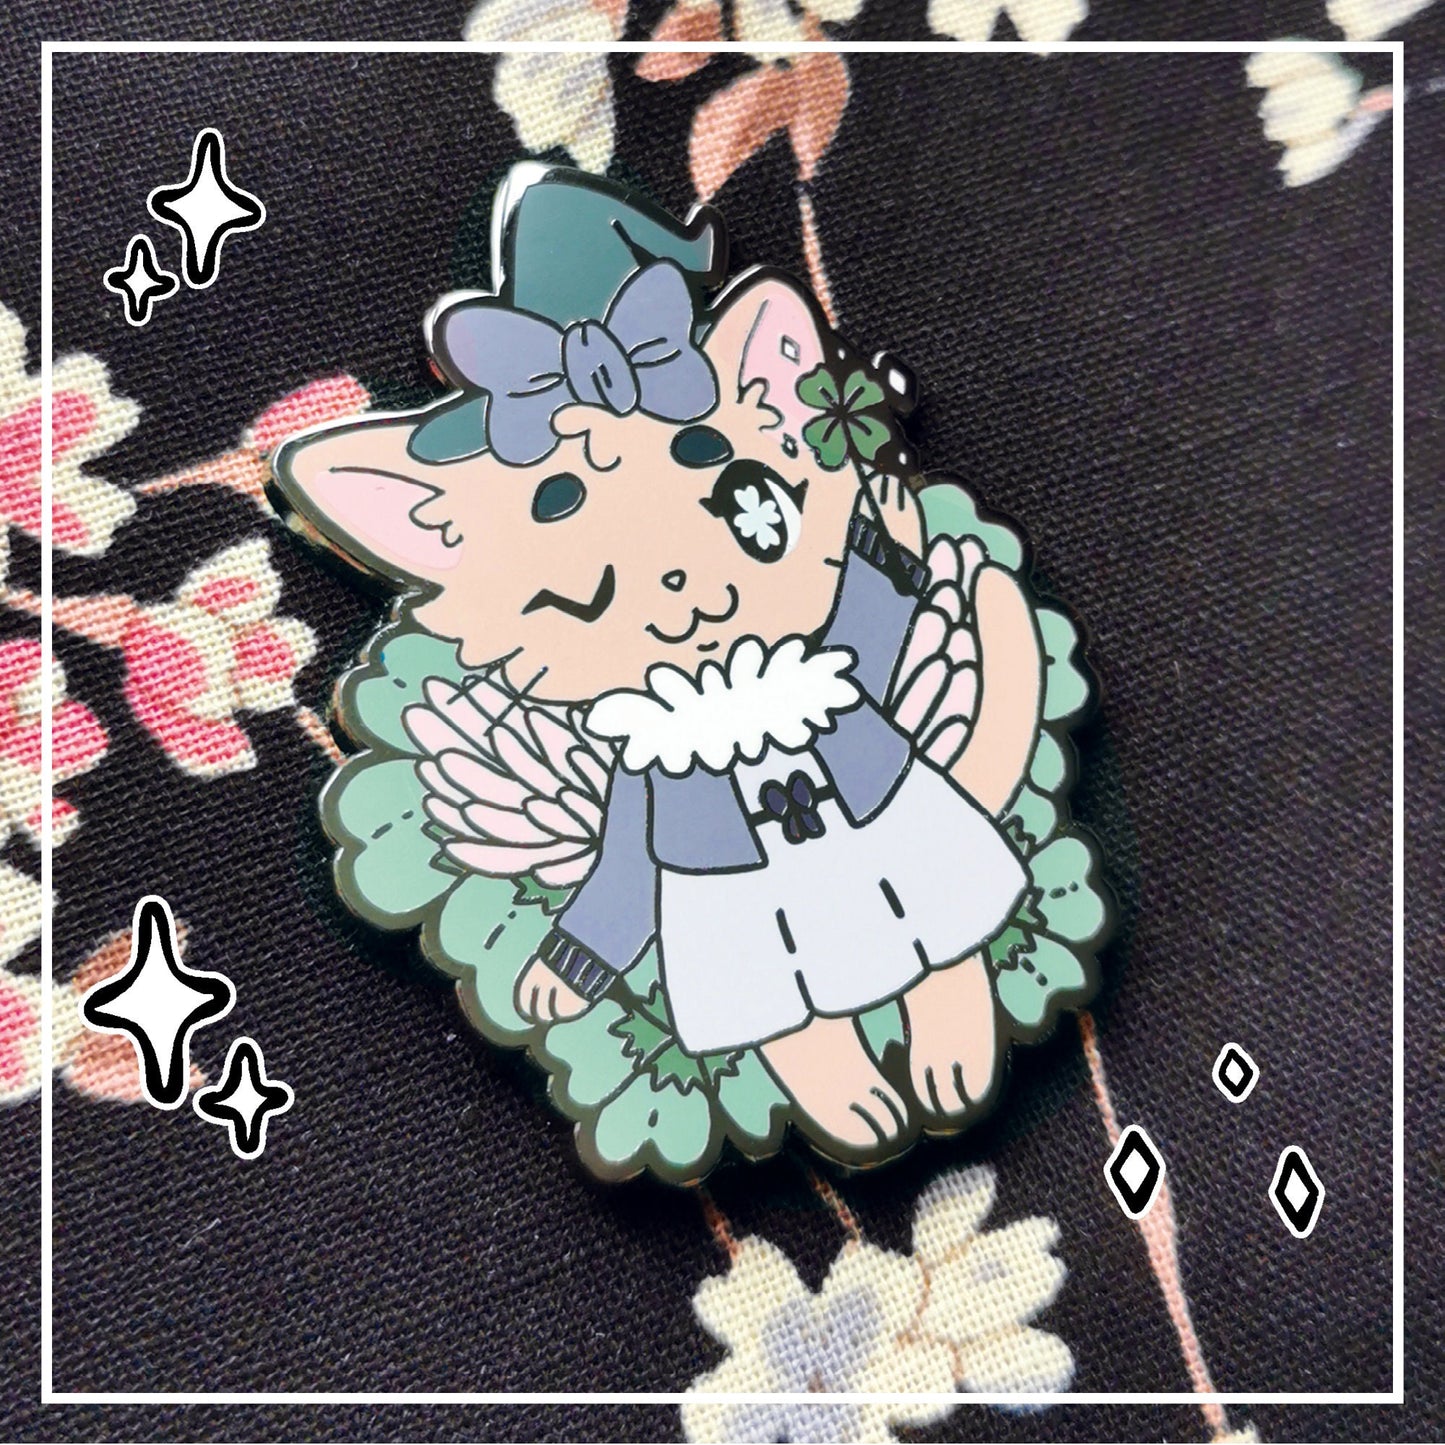 Myuna's Lucky Witch Pin - Little Witch Acatemia Cat Witch Pins - Cute Good Fortune Cat Witch talisman, Kawaii Witchy Occult Hard Enamel Pins